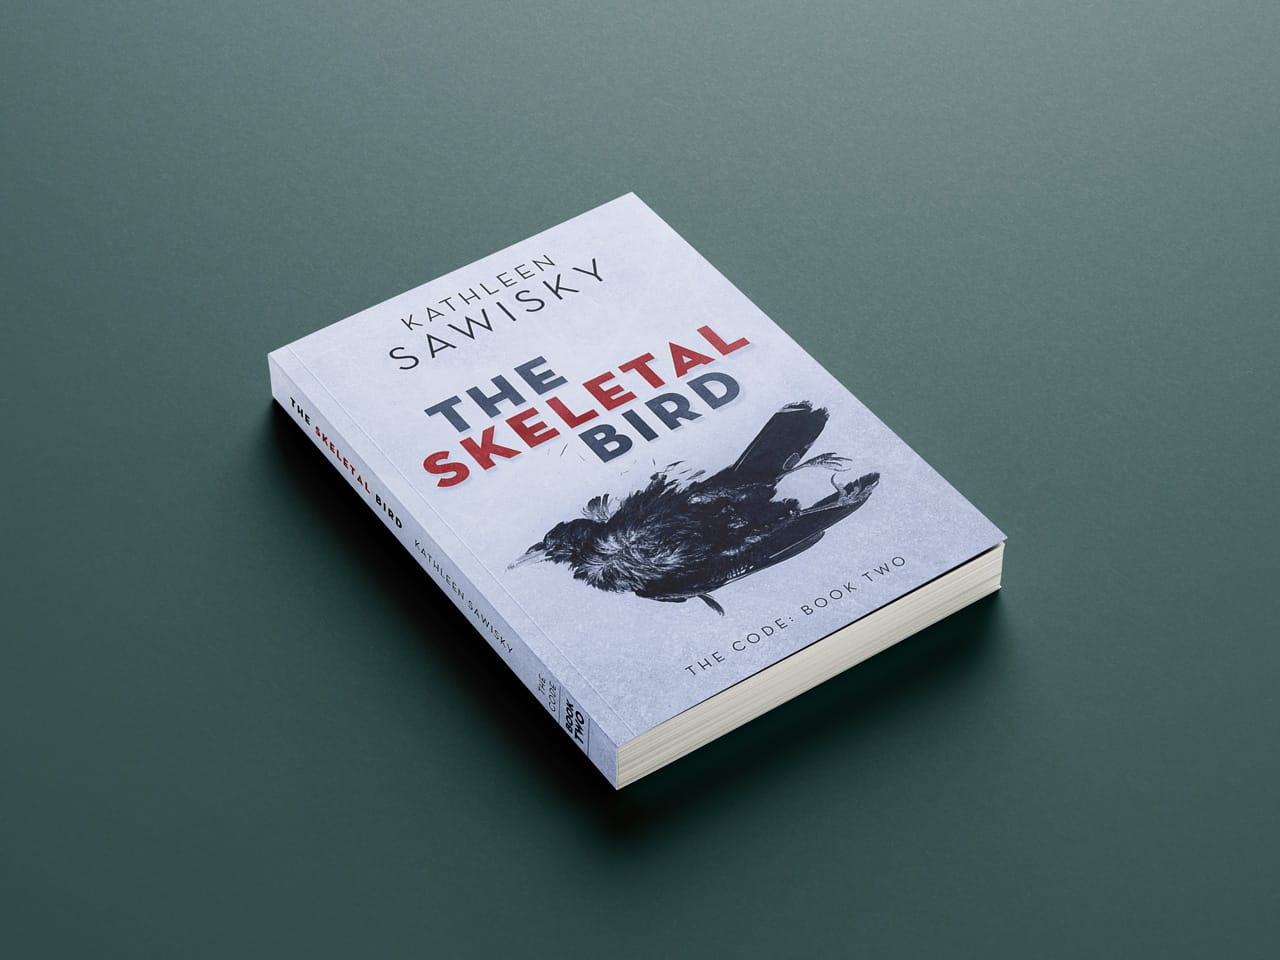 project book covers the skeletal bird cover